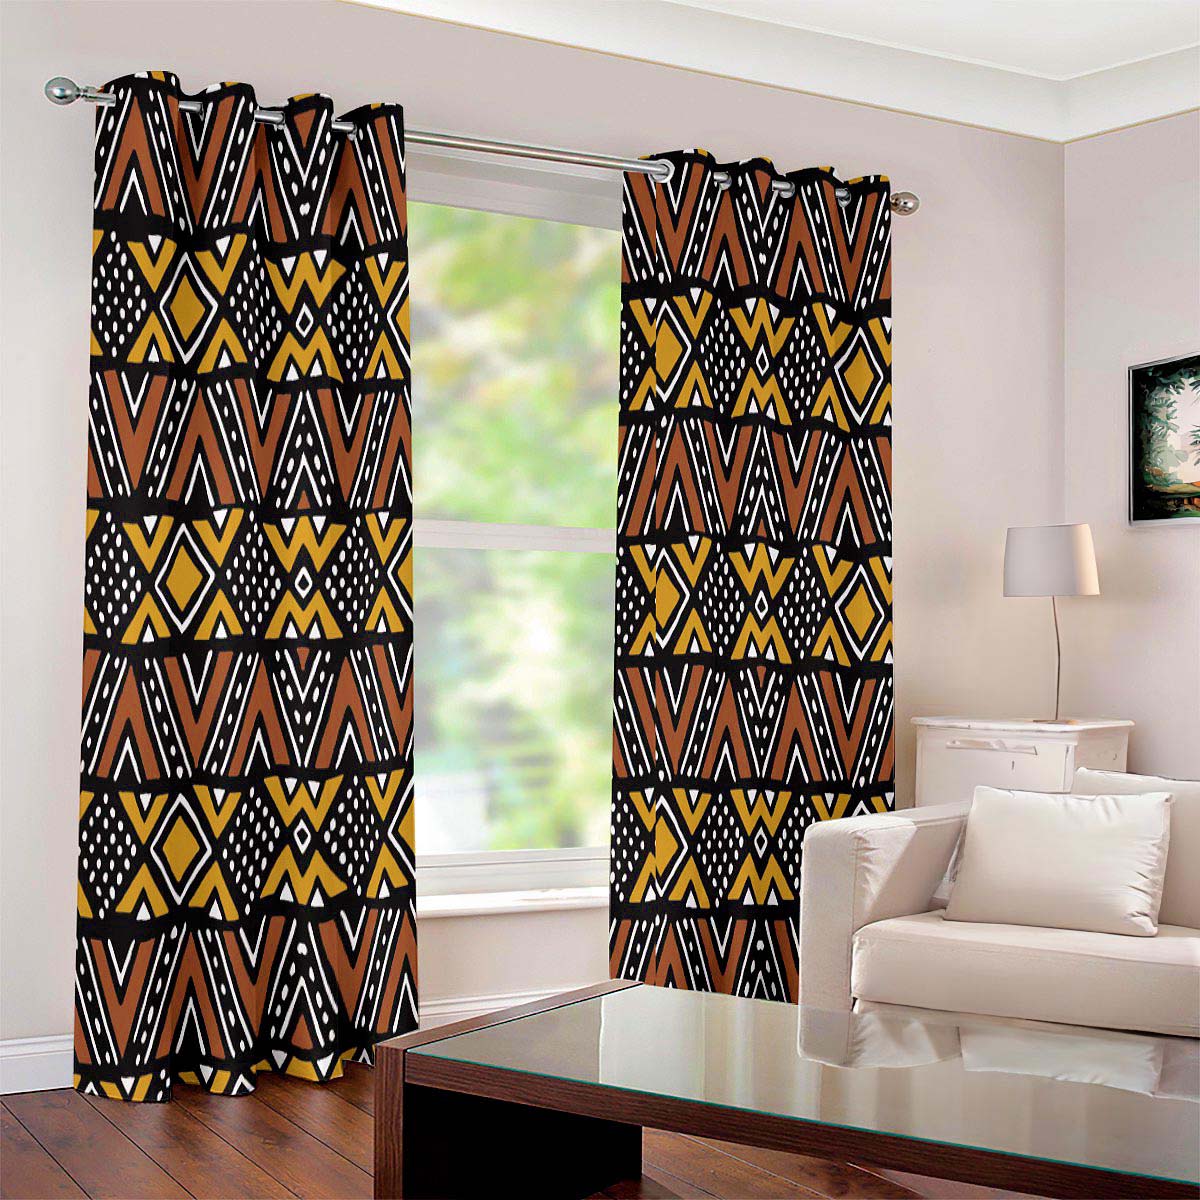 Mudcloth Curtains Blackout in African Grommet Print - Bynelo